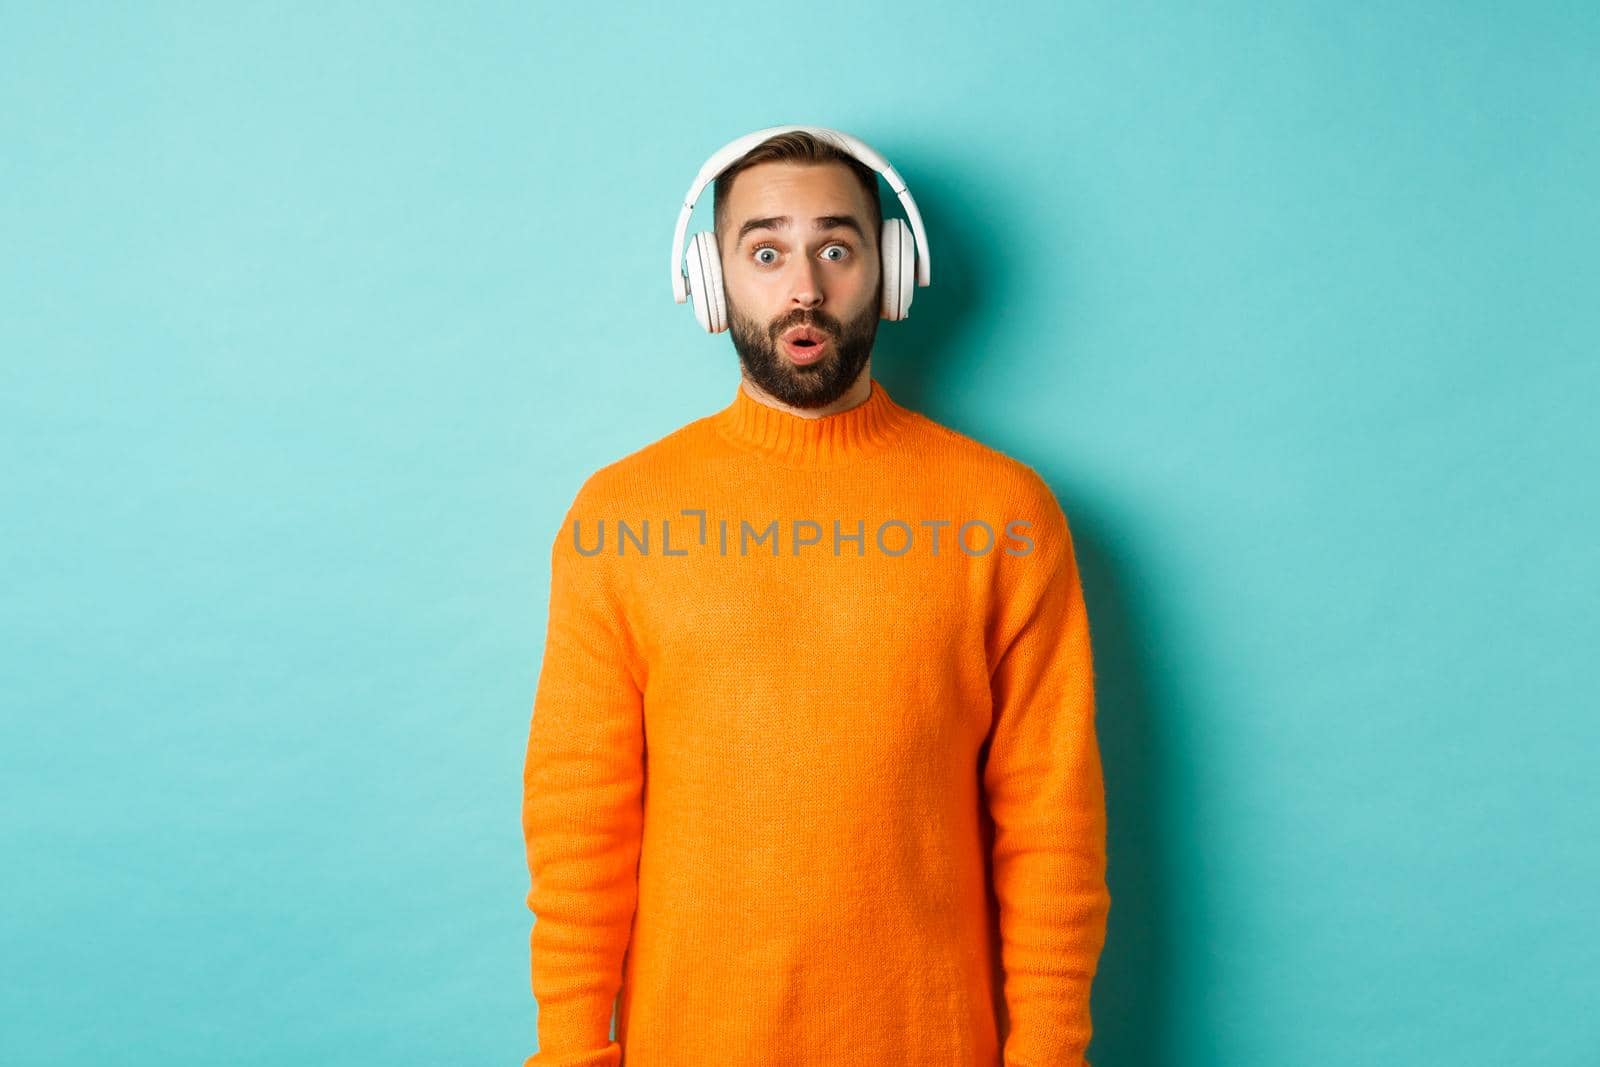 Amazed adult man listening music in headphones, looking at camera impressed with sound, standing over turquoise background.